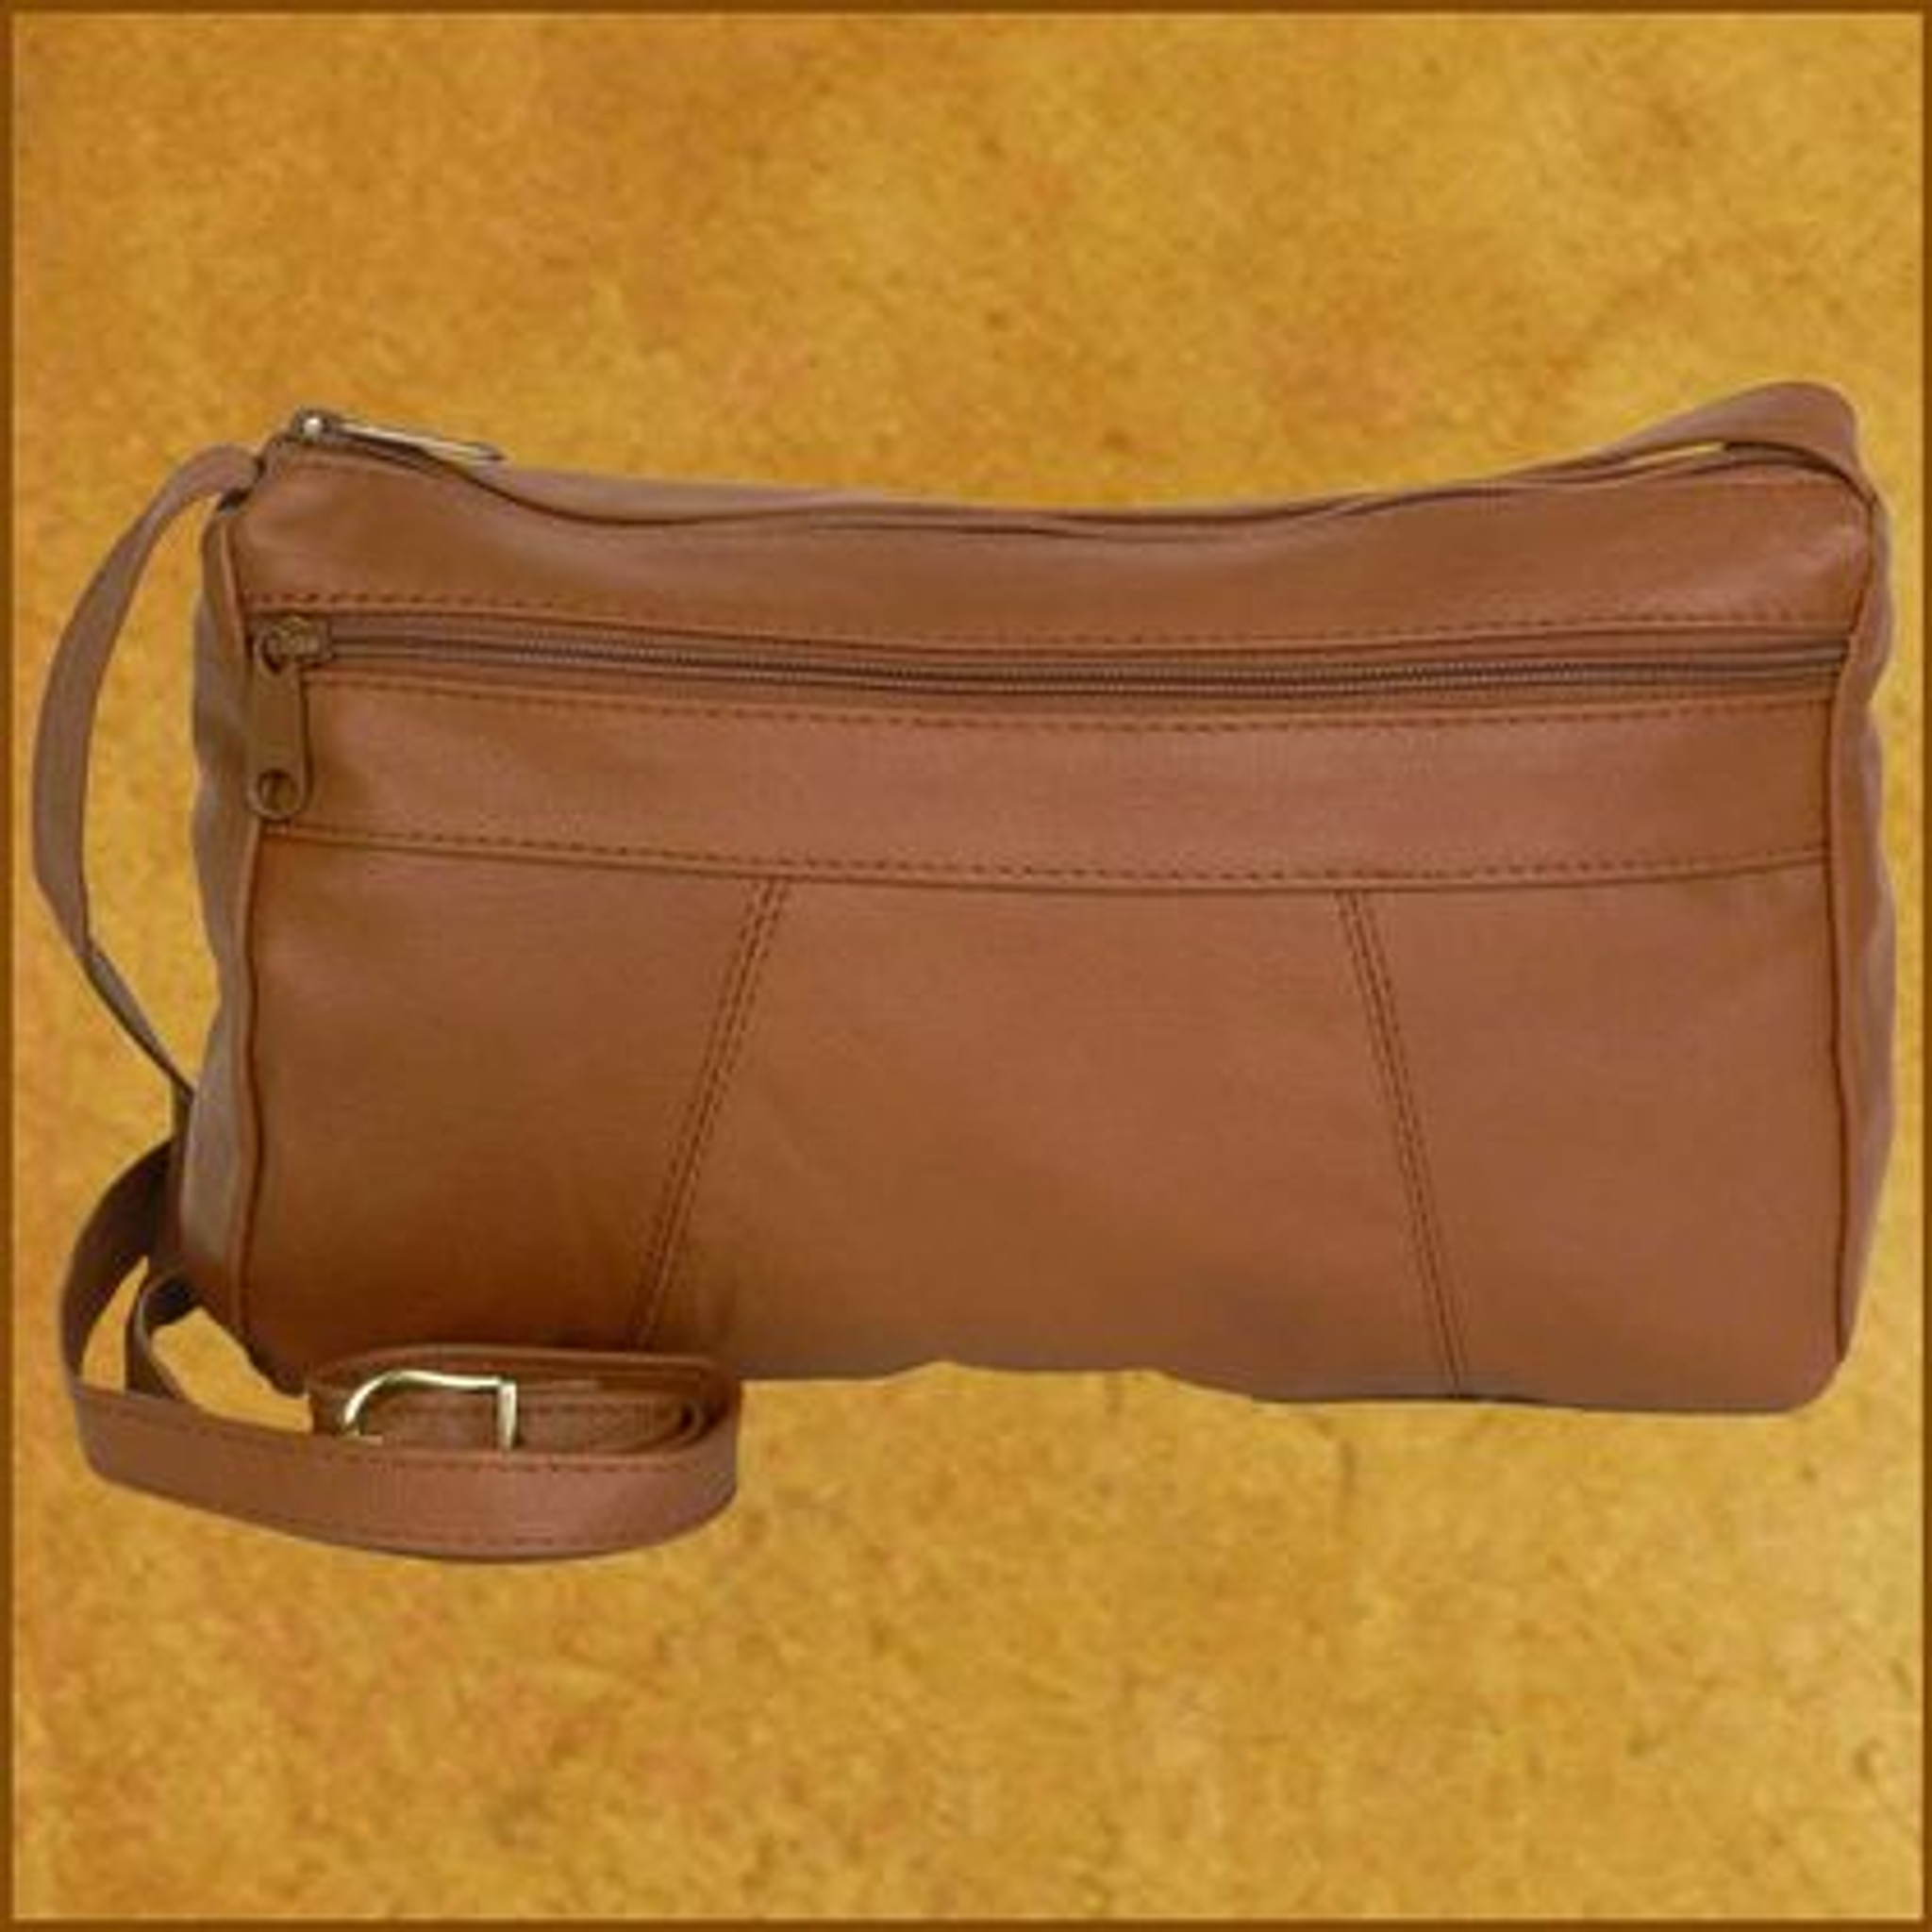 Small 2 Zip Coin Purse - Ace Leather Goods, Inc.